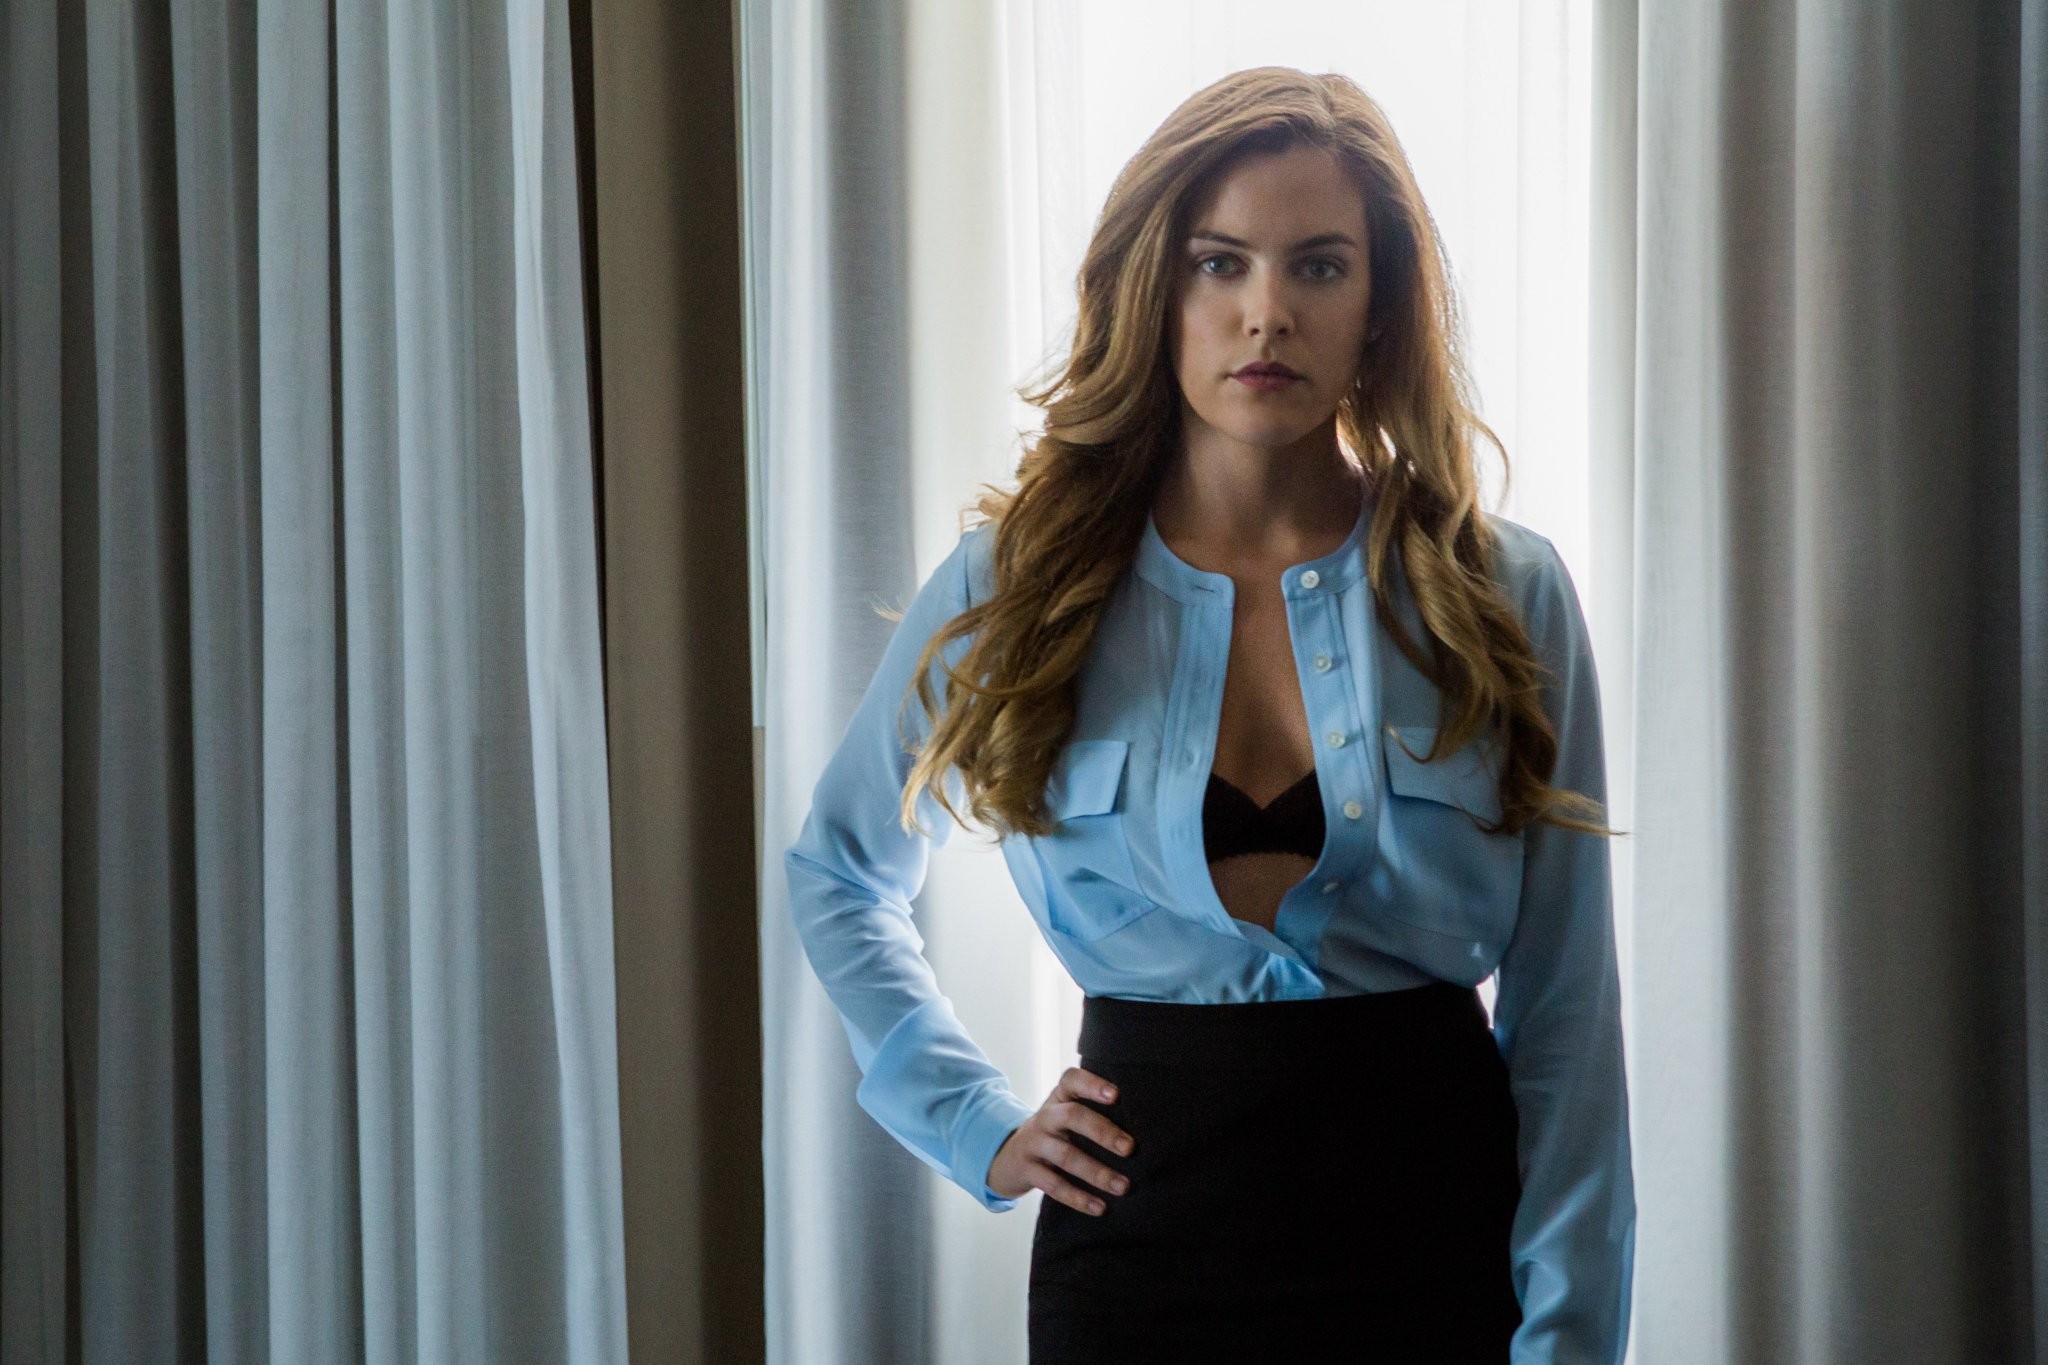 The Girlfriend Experience 2021 Wallpapers